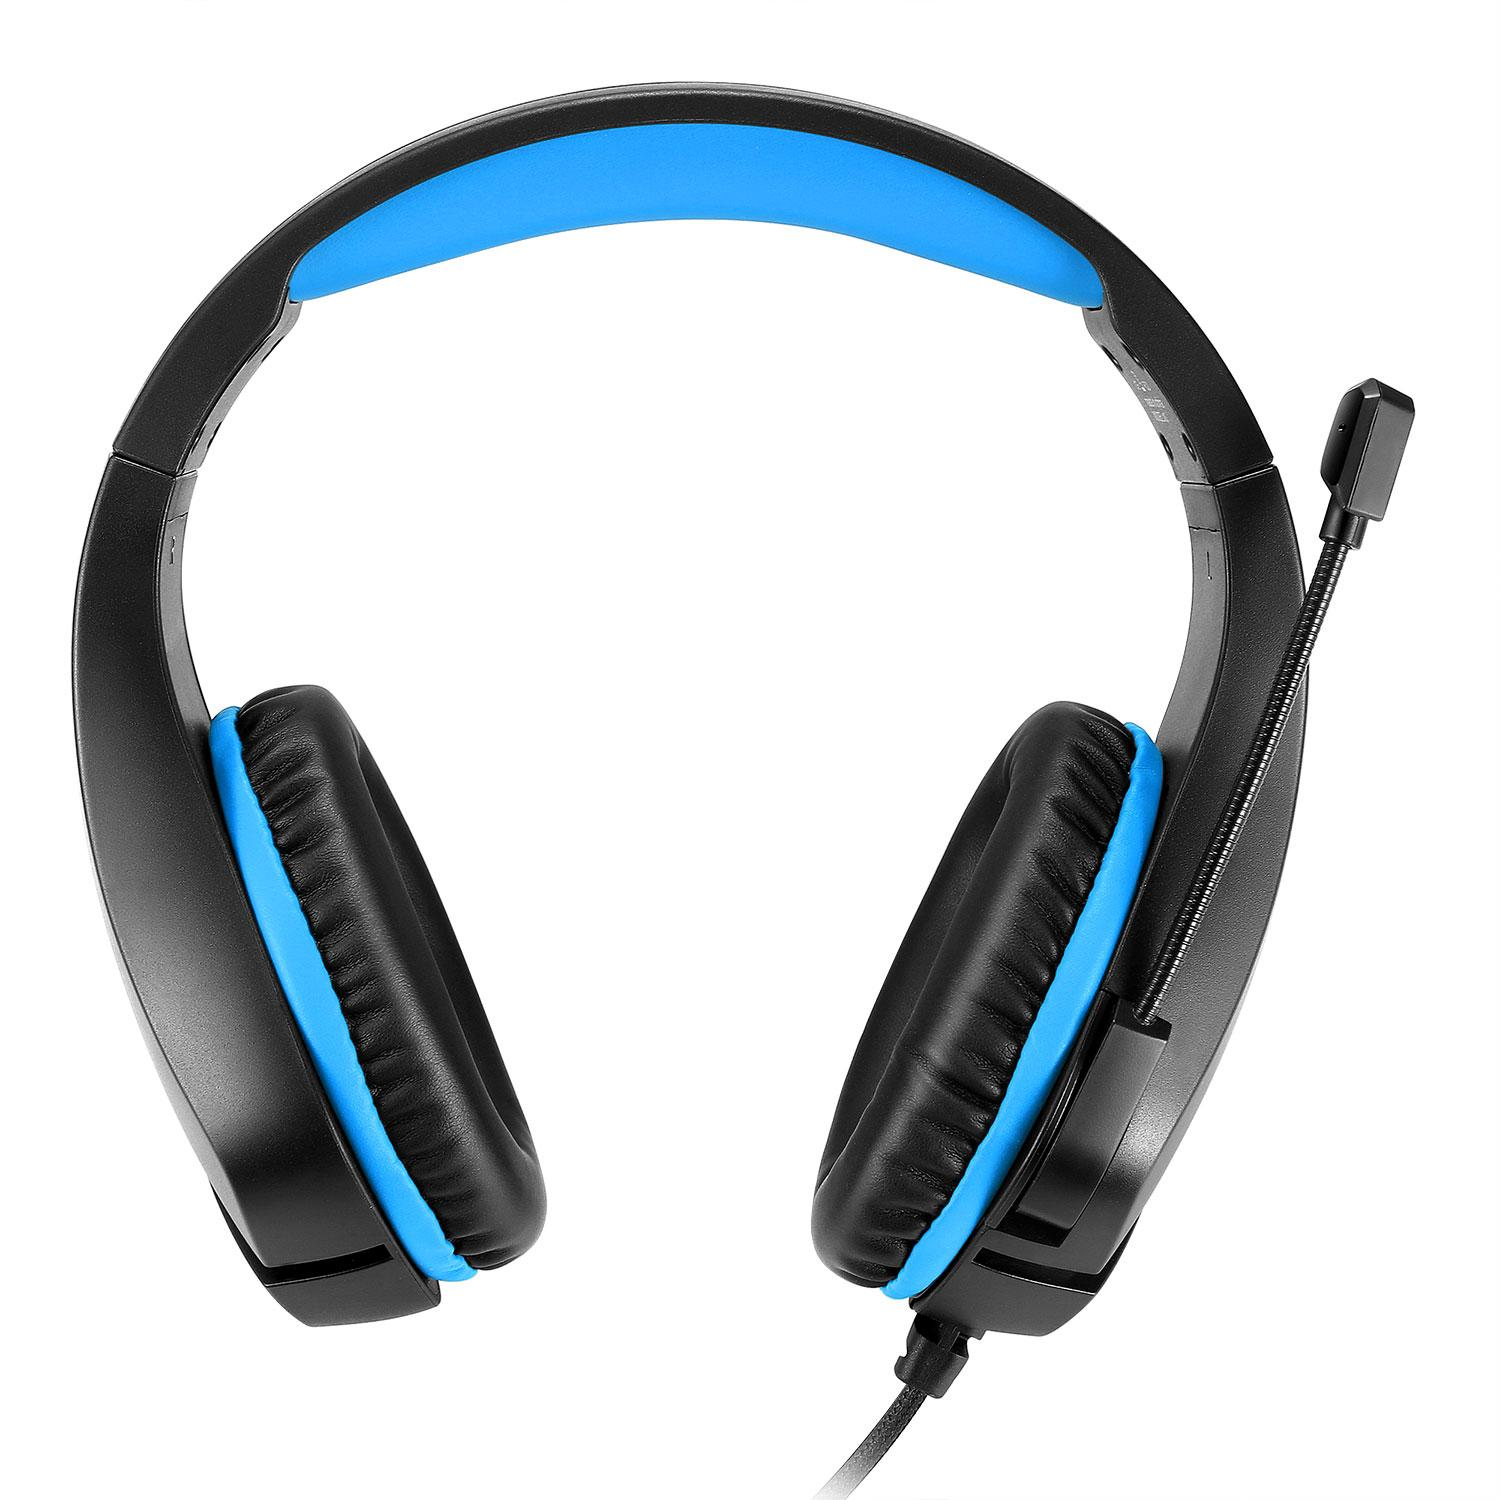 INF Gaming-Headset mit 3,5 mm - Over-ear Schwarz/Blau Headset Gaming Klinkenstecker Schwarz/Blau